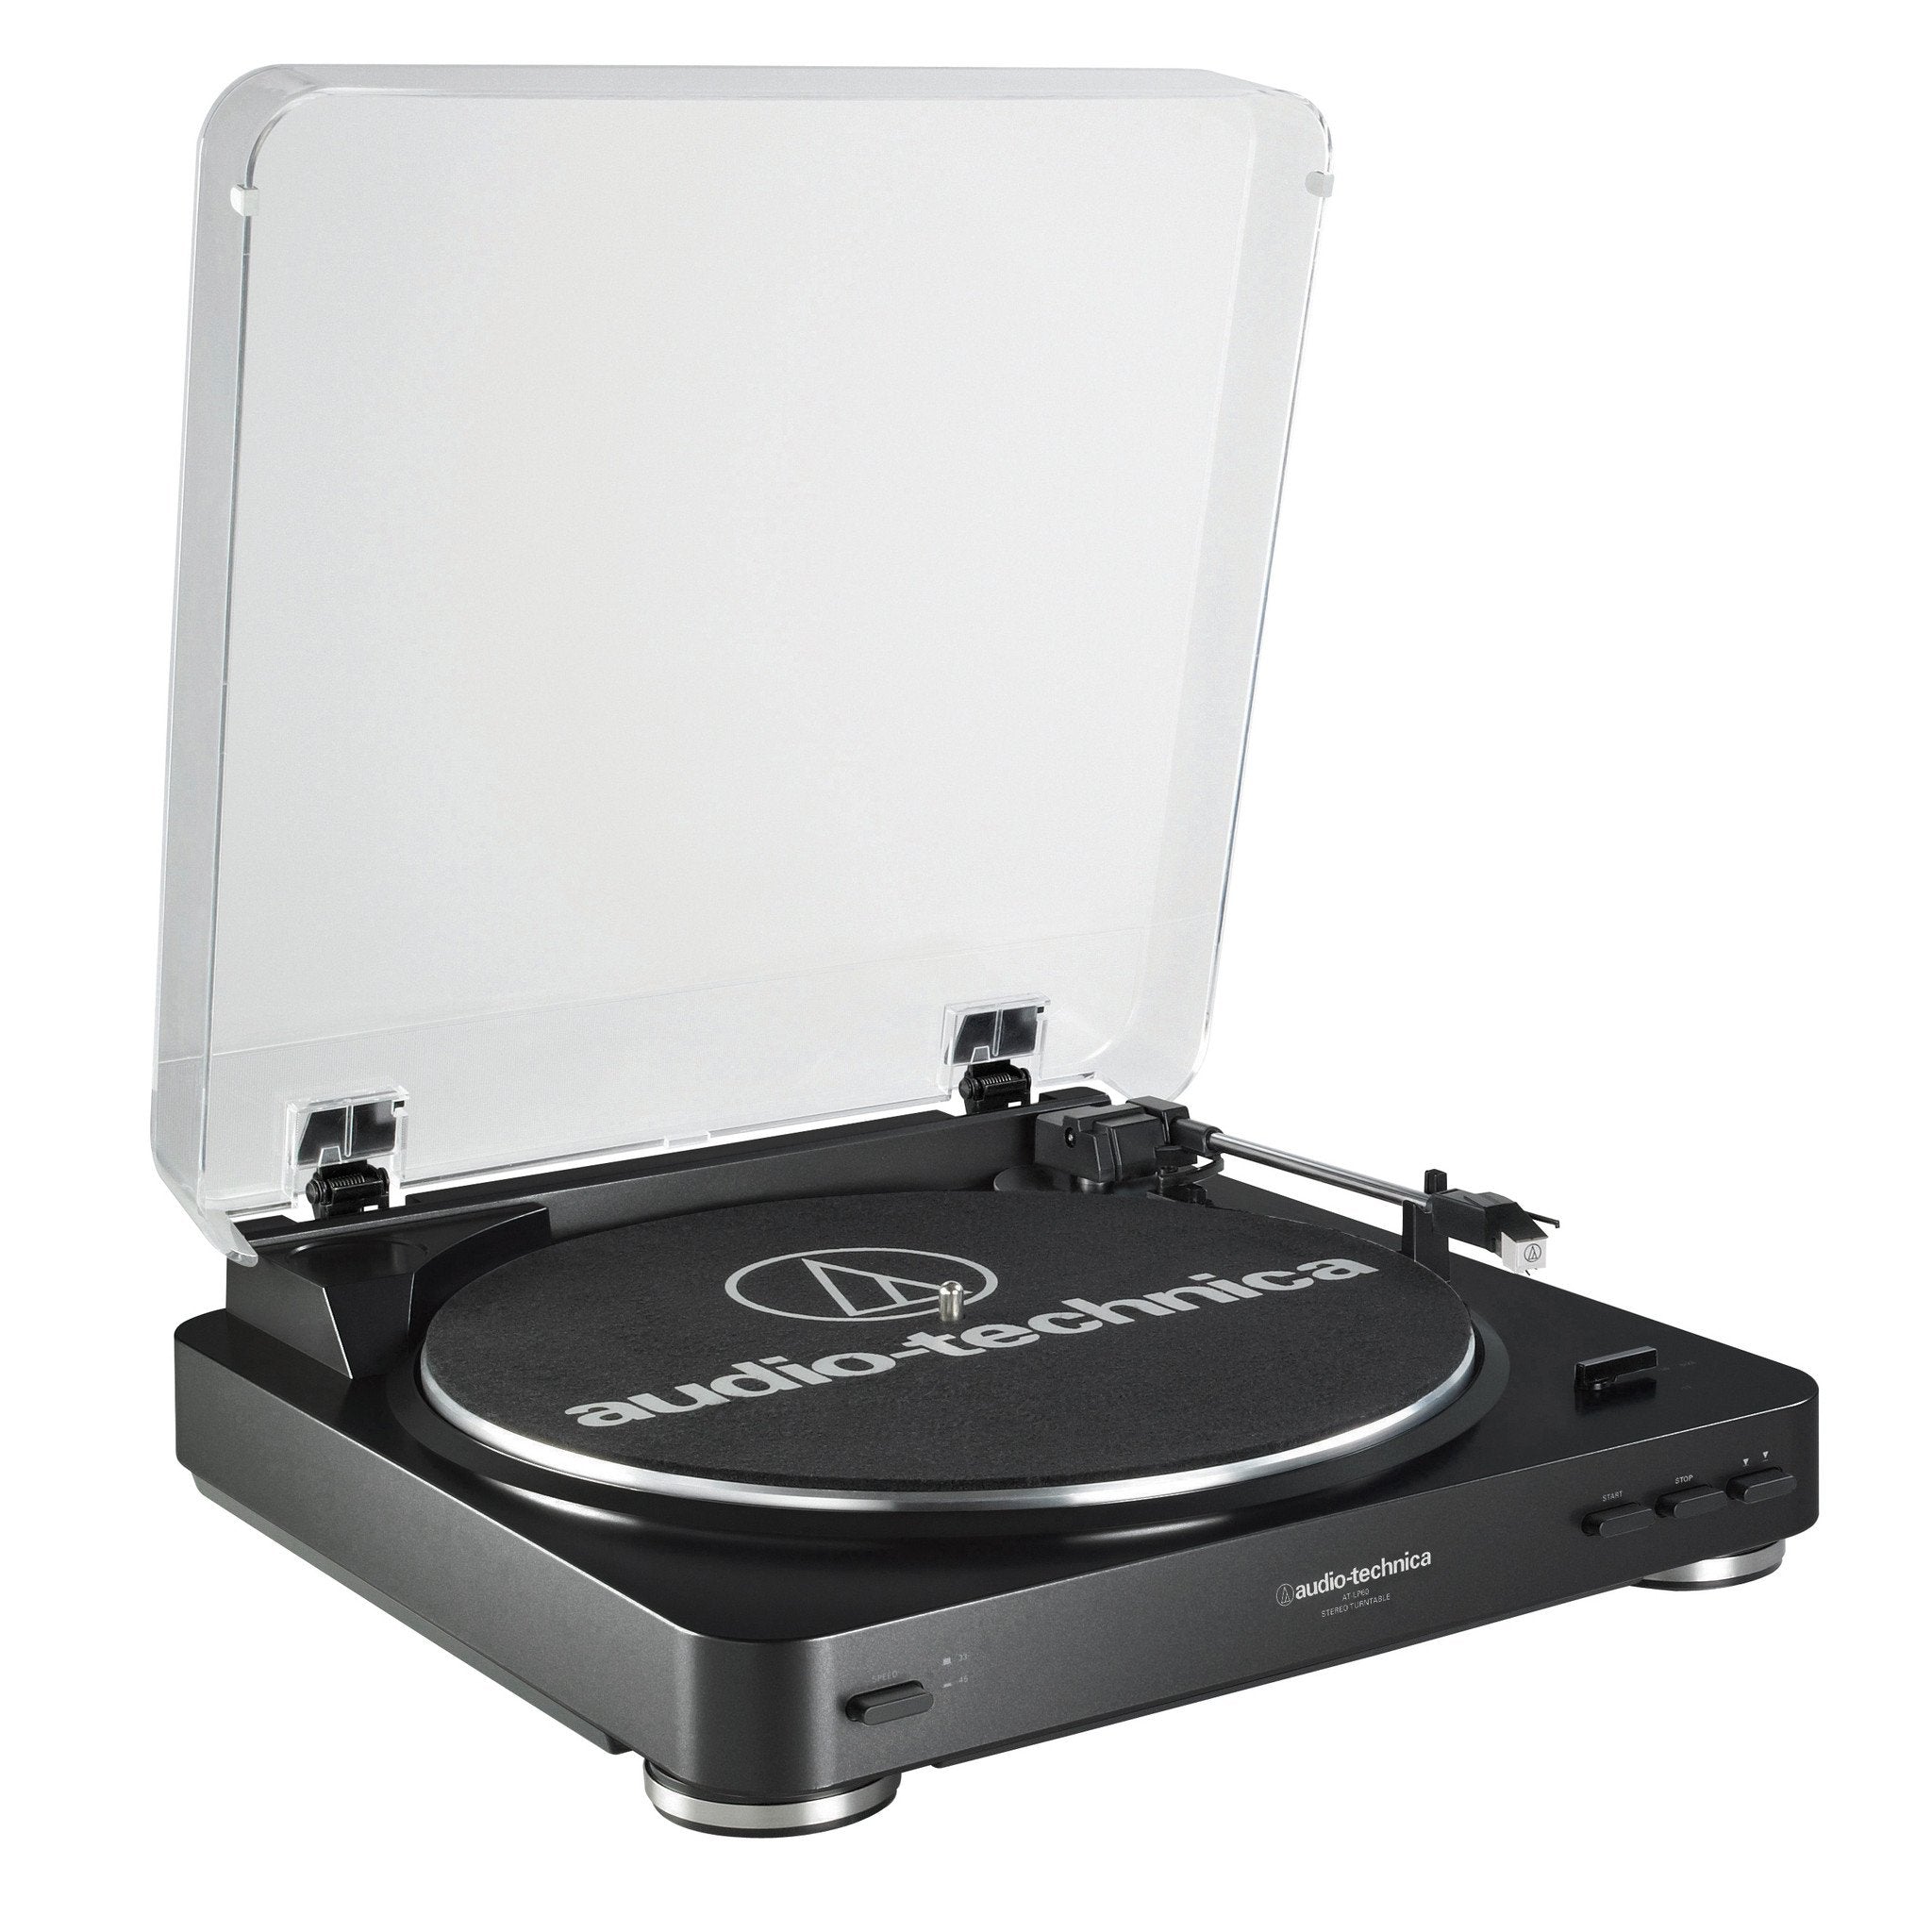 Audio-Technica: AT-LP60BK Automatic Turntable - Black (Discontinued Model)